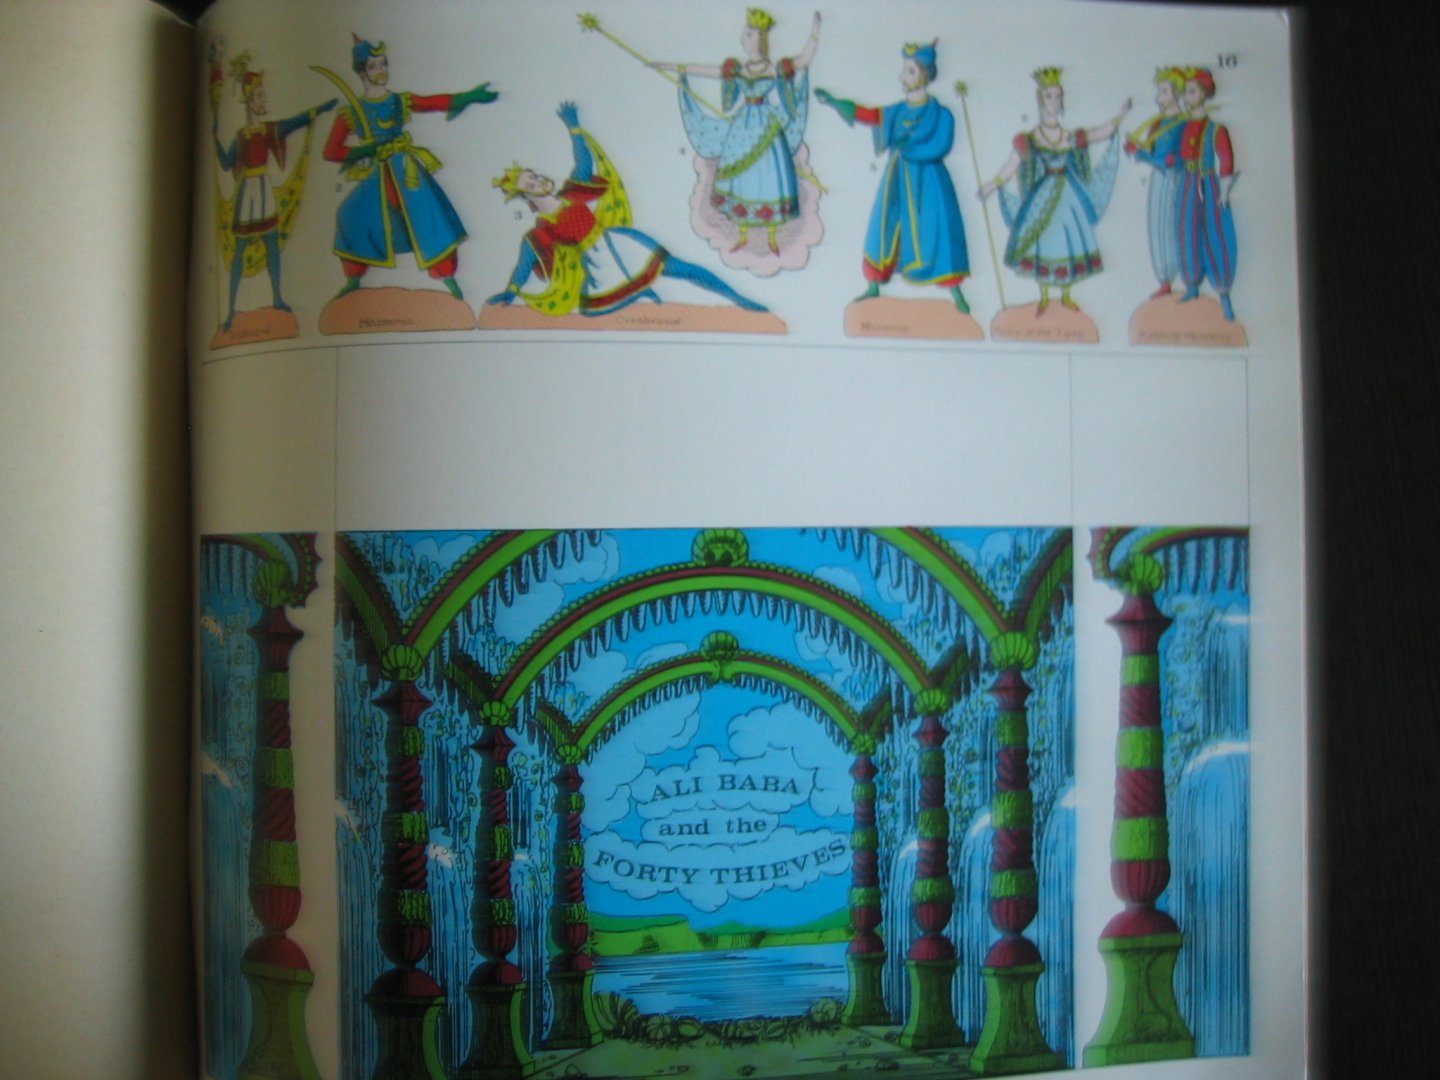 Jackson, Peter - The Juvenile Drama Pollock's Britannia Theatre, with the characters and scenes for Ali Baba and the forty thieves.